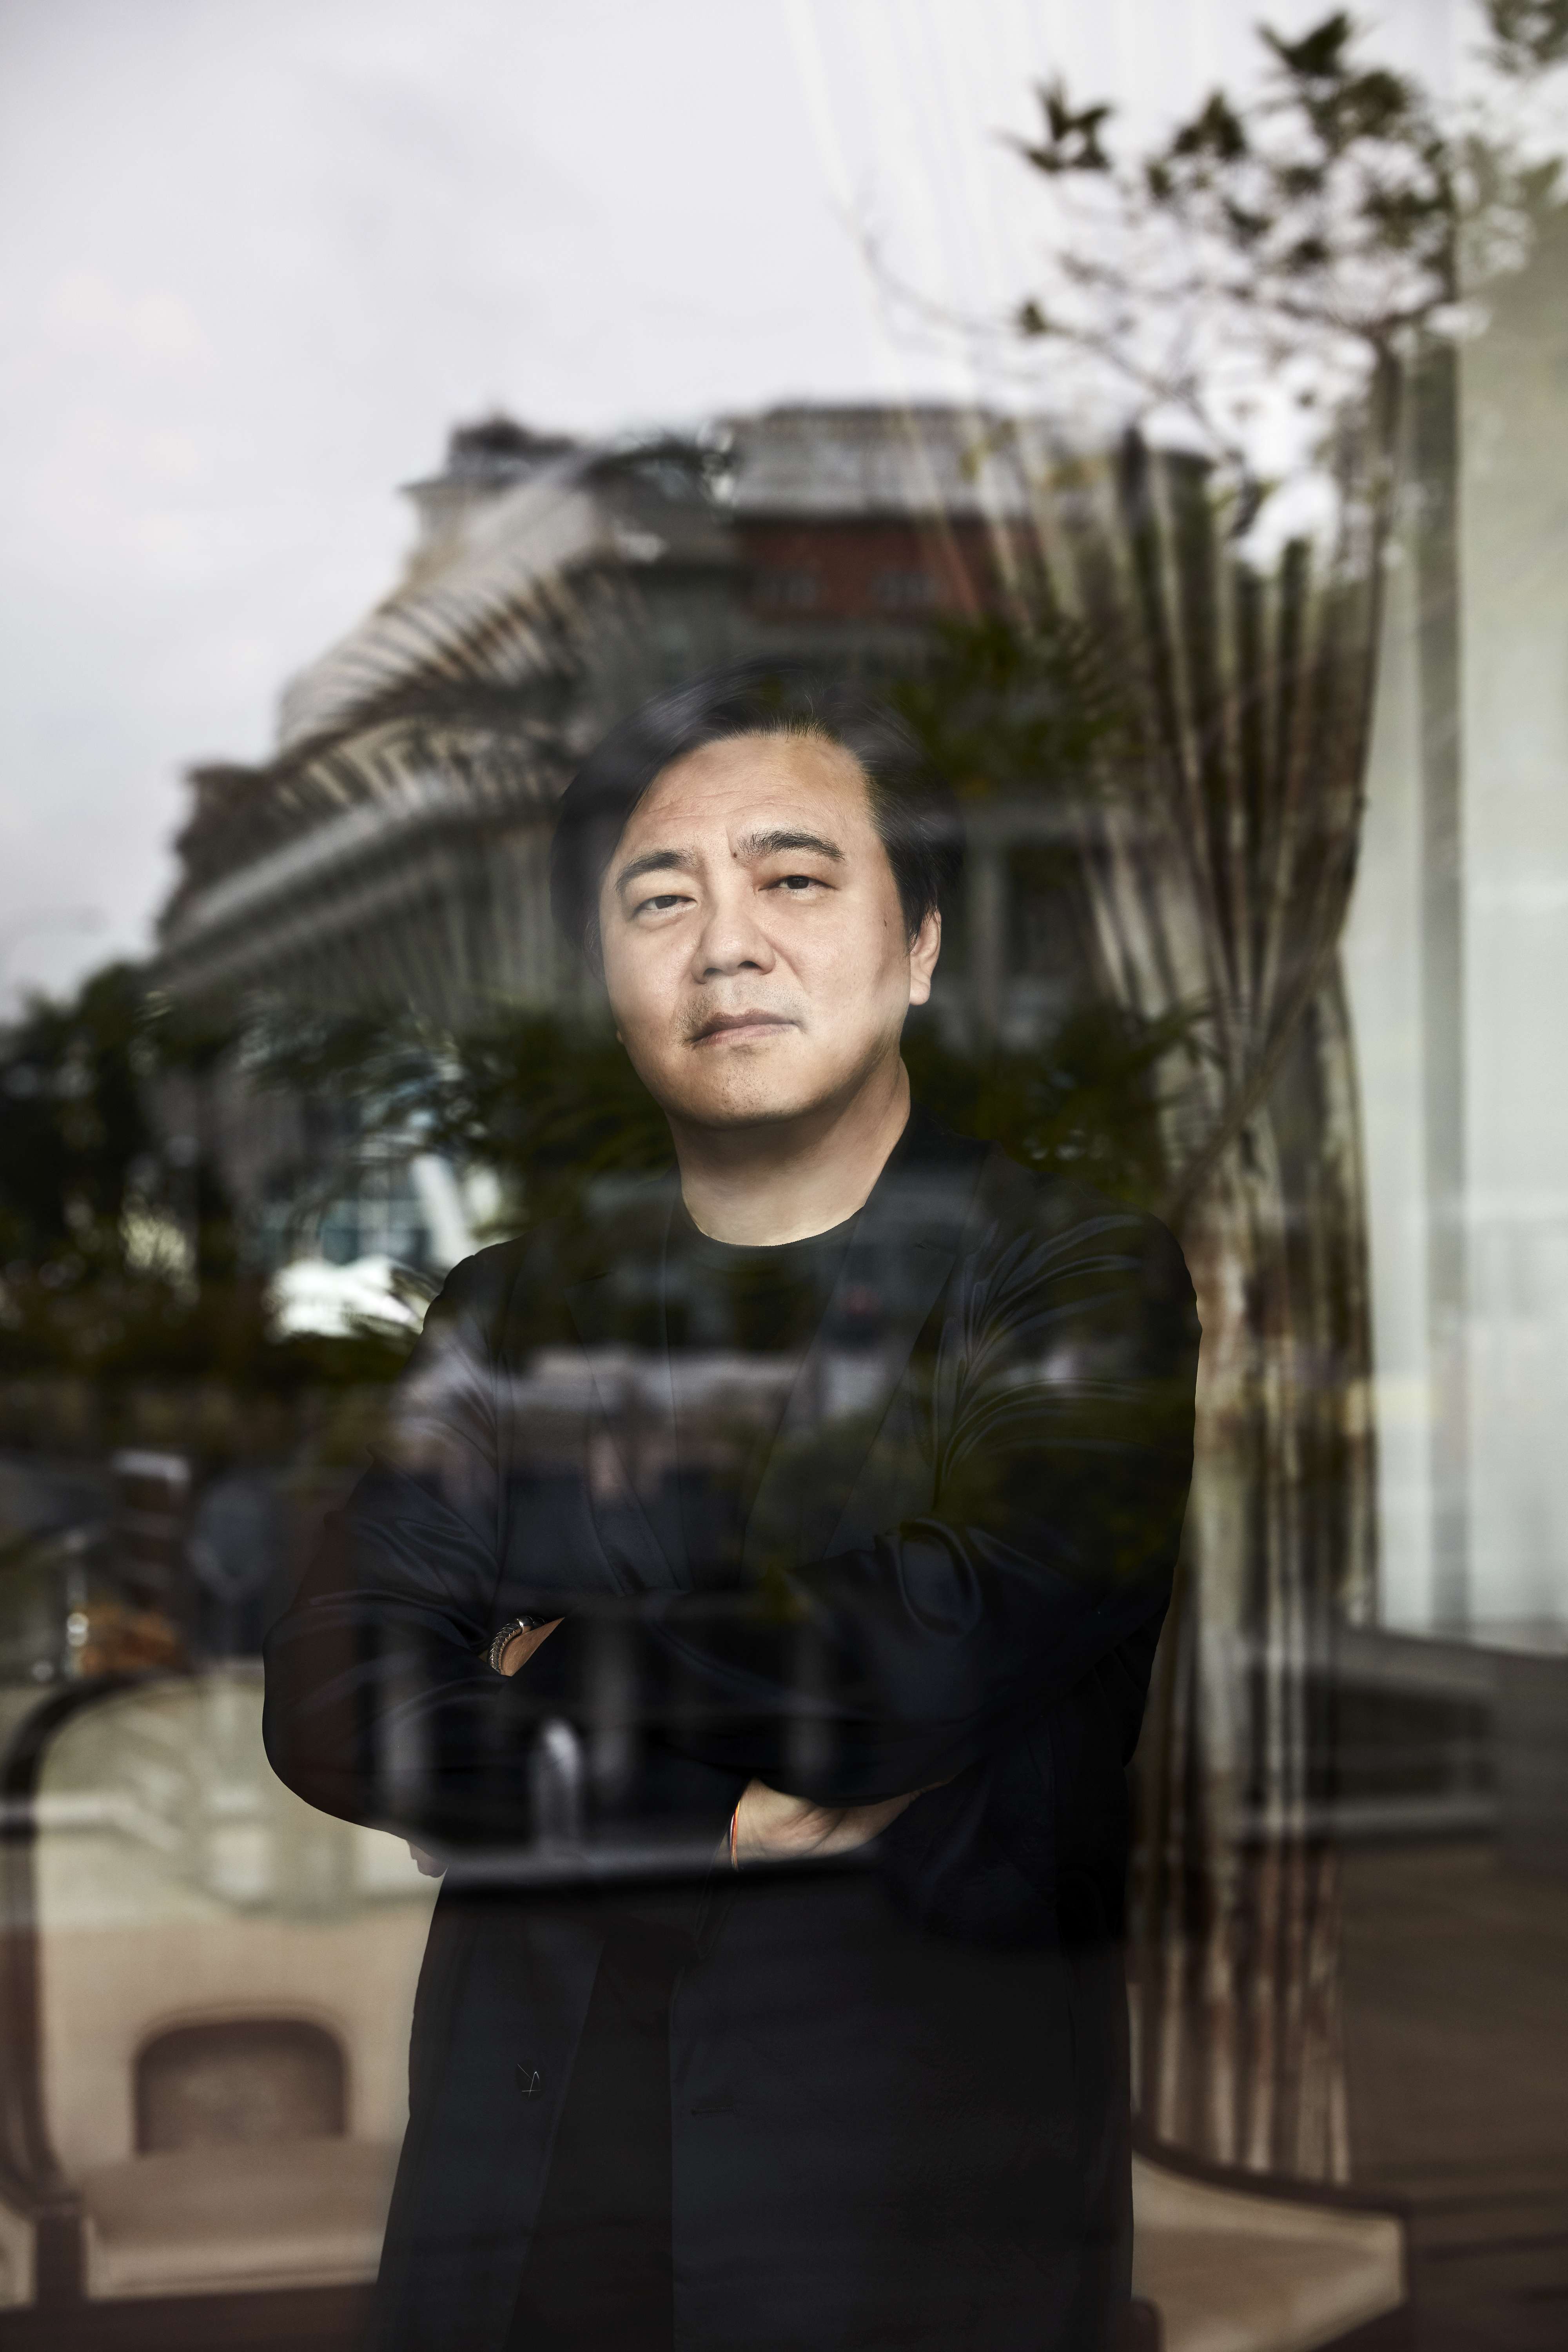 Assassin’s Creed producer Philip Lee. Photo: Jeff Chang